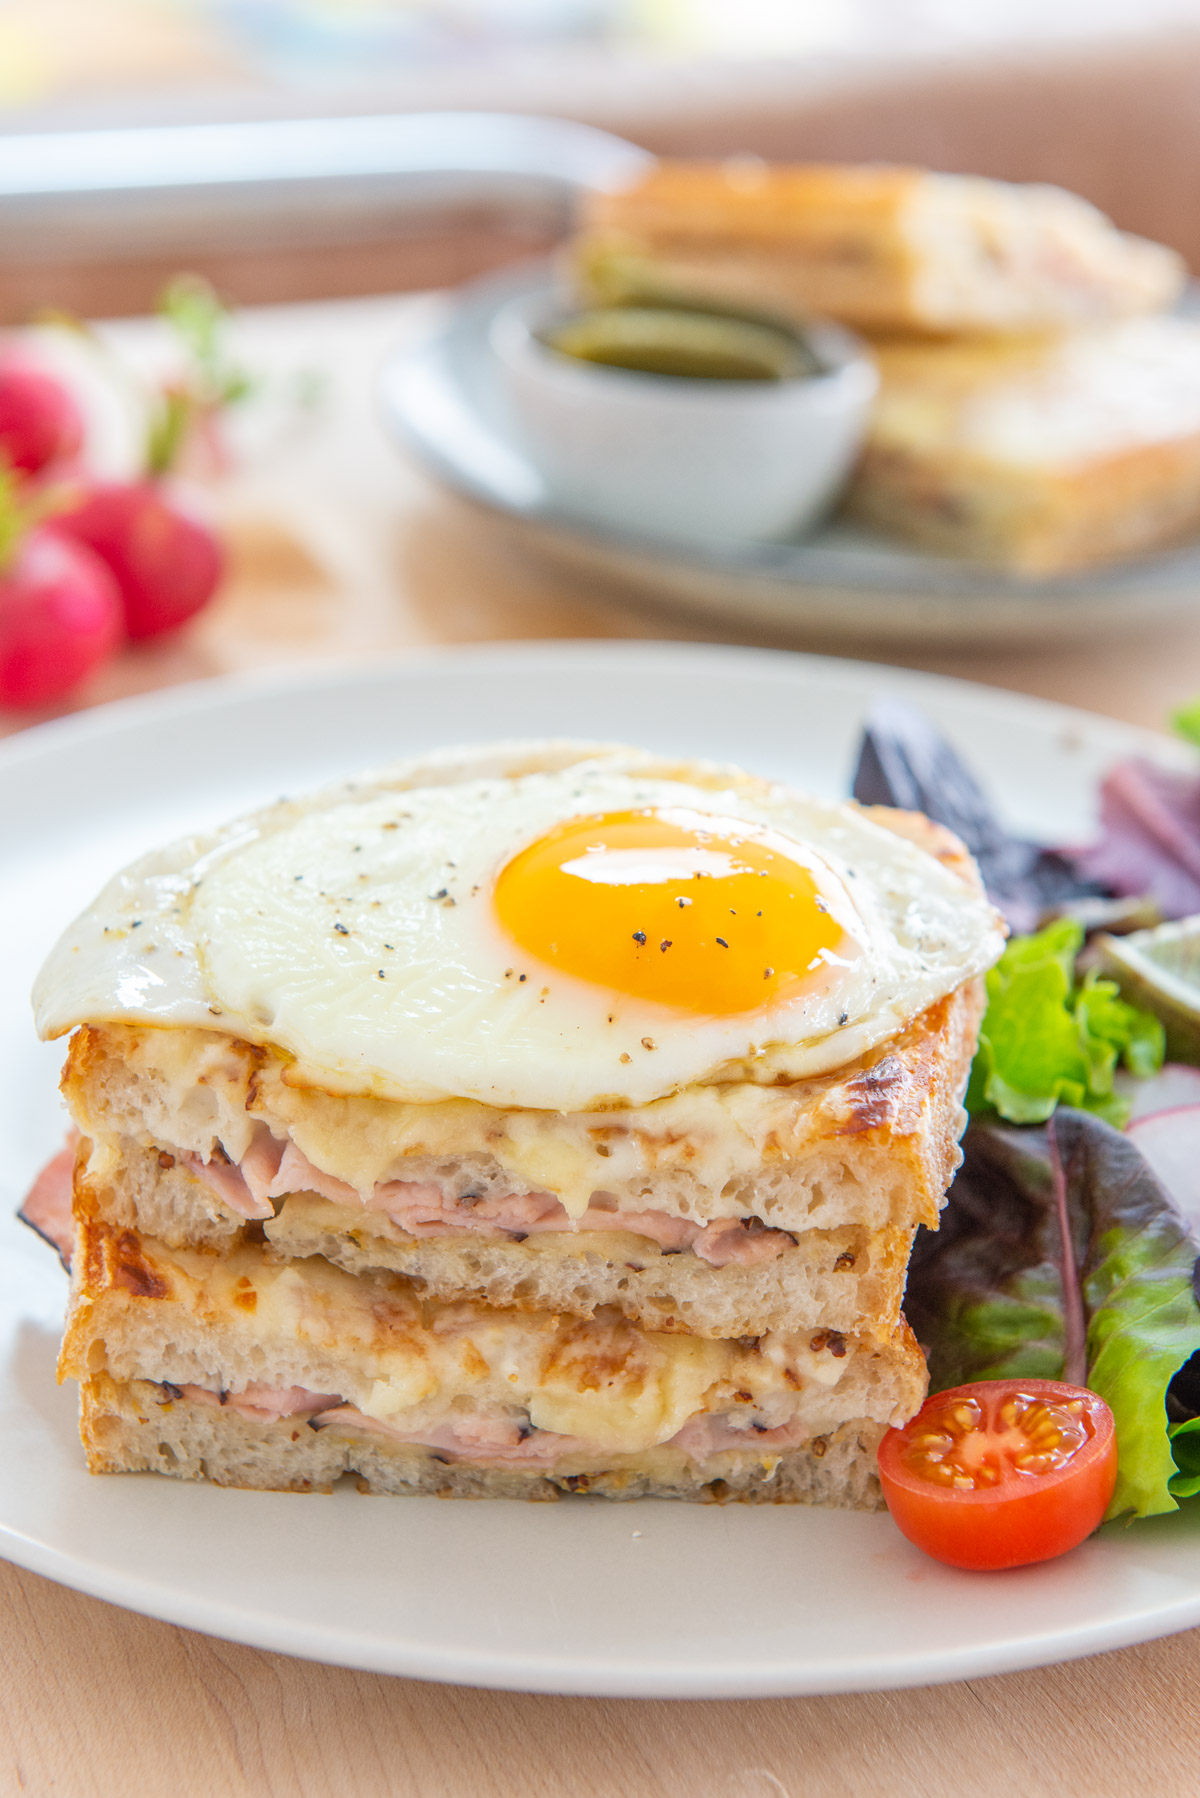 Croque Madame On a Plate with Side Salad